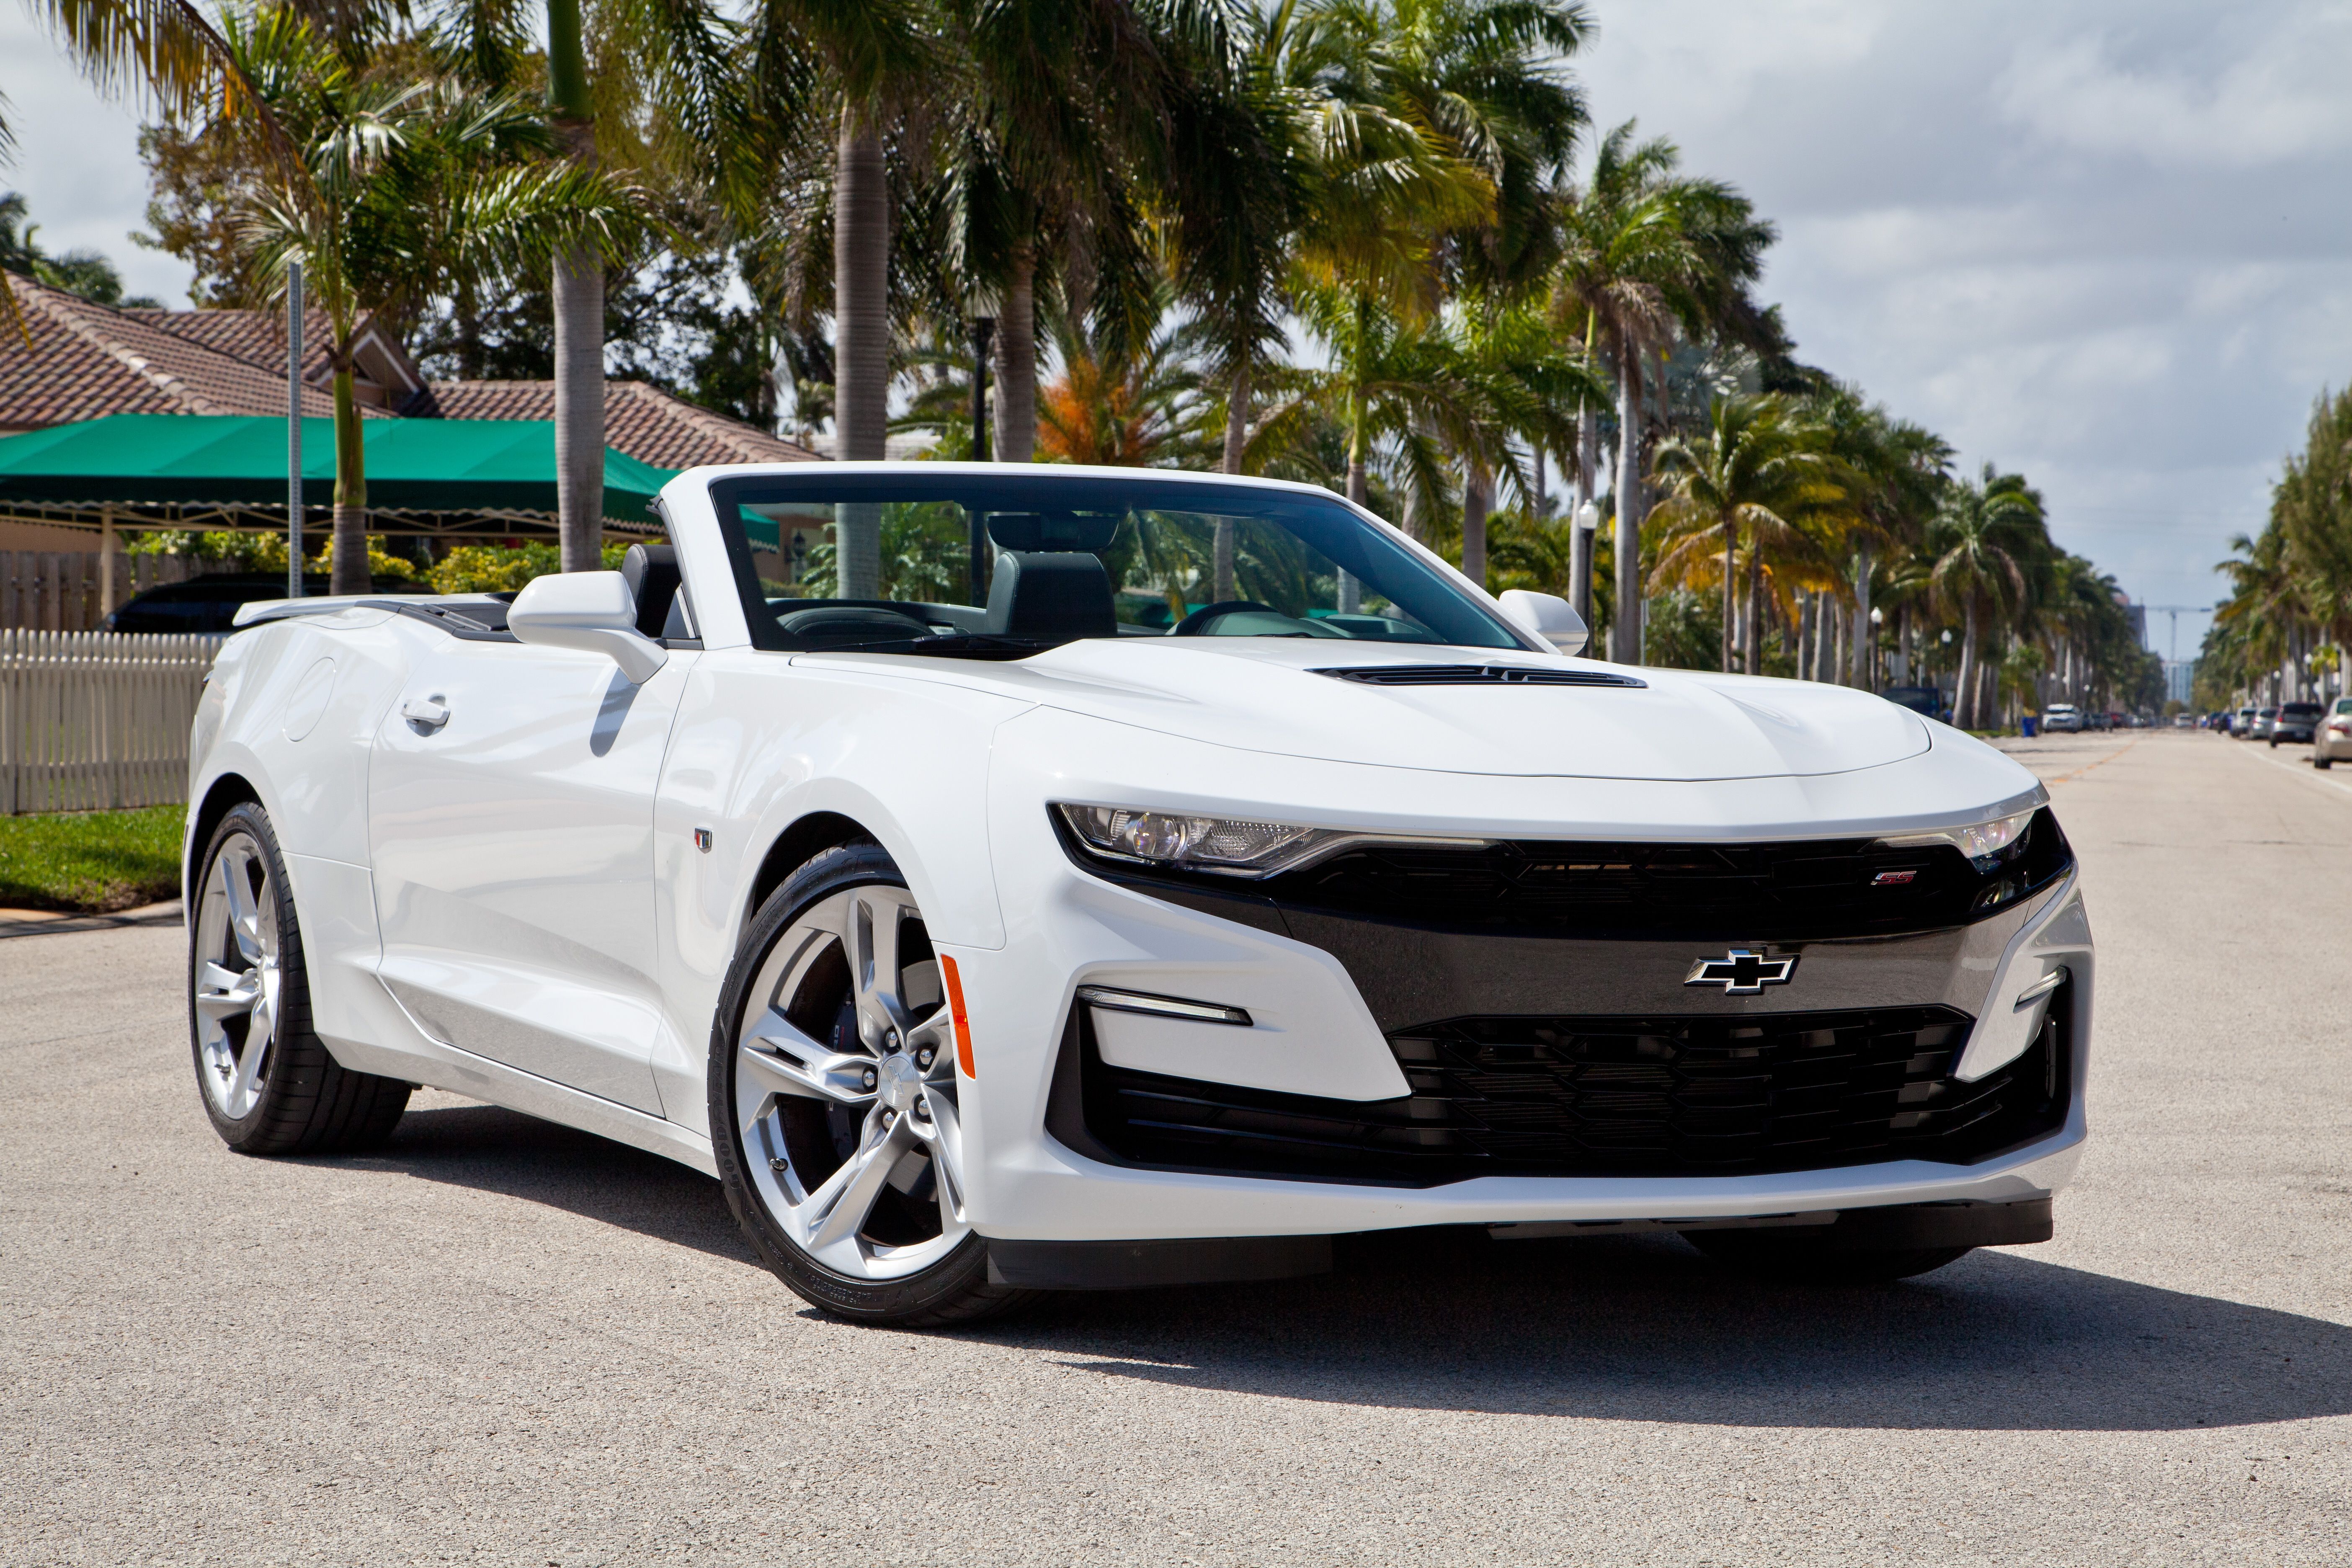 2018 - 2019 We Don't Care - It's Time for the Chevy Camaro to Die